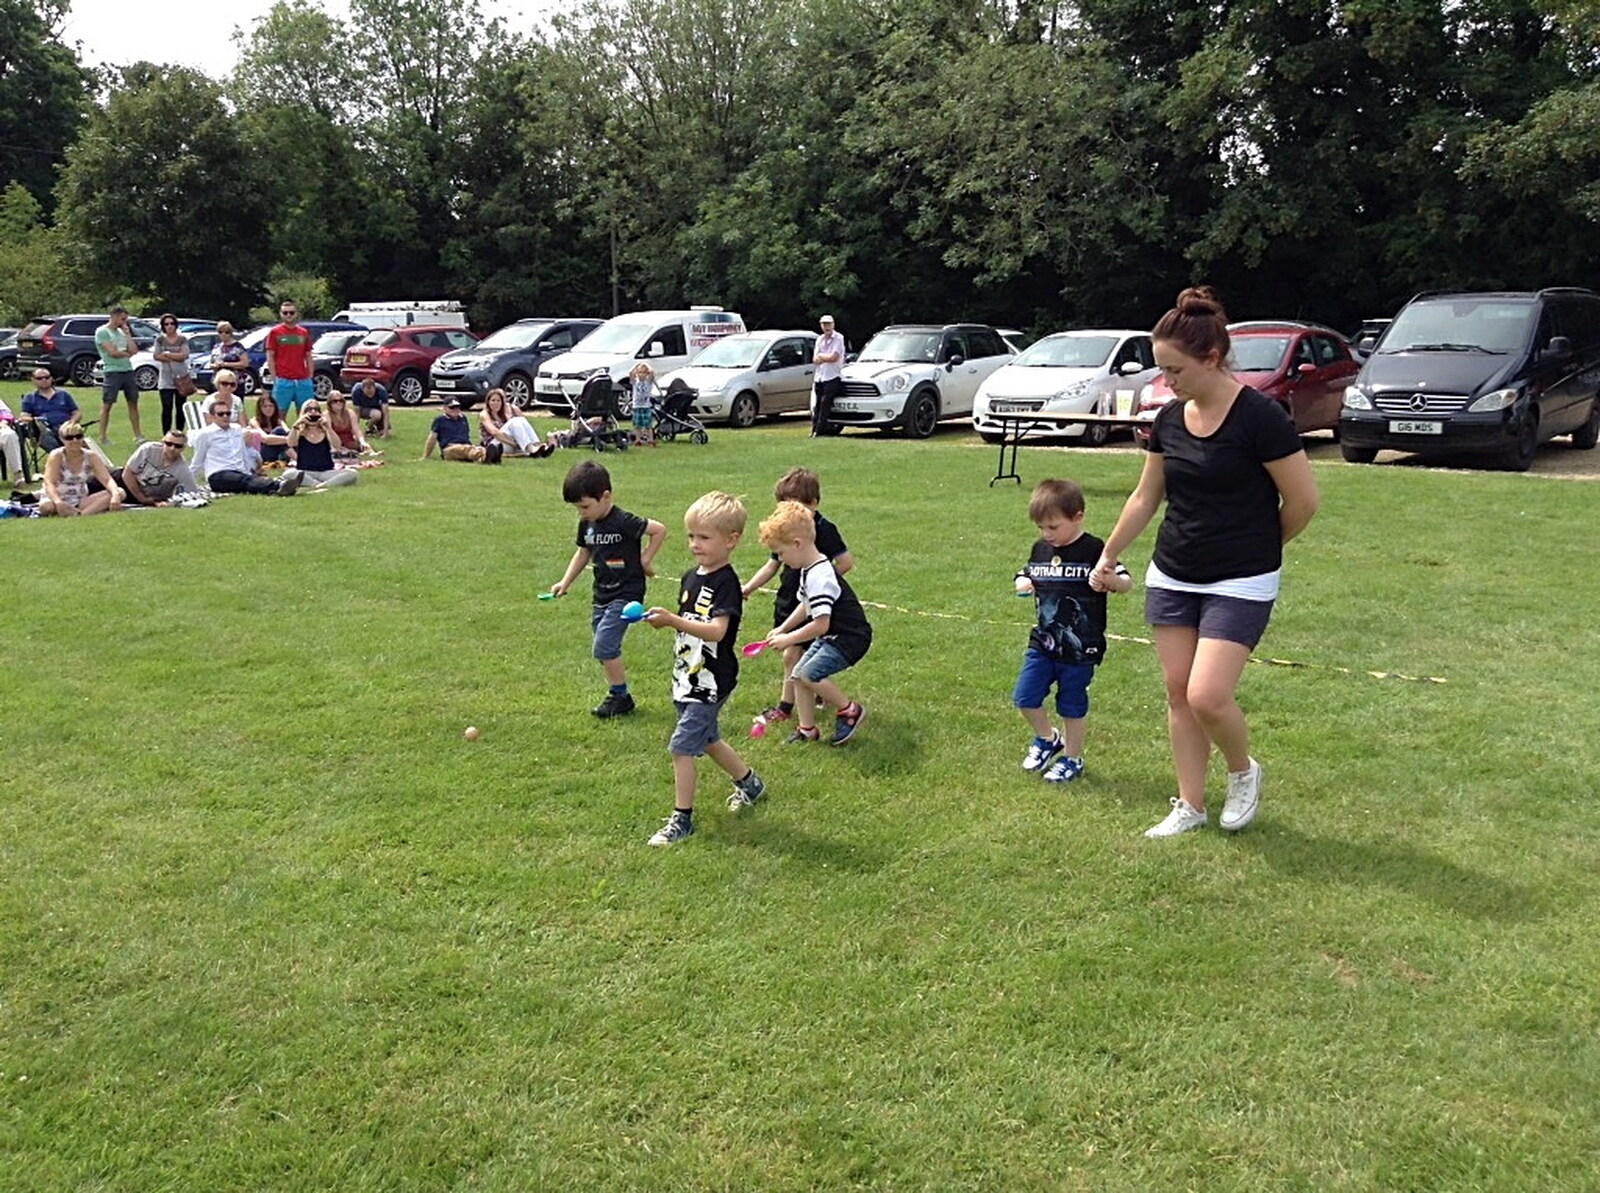 It's the egg-and-spoon race from Harry's Nursery Life, Mulberry Bush, Eye, Suffolk - 8th July 2016